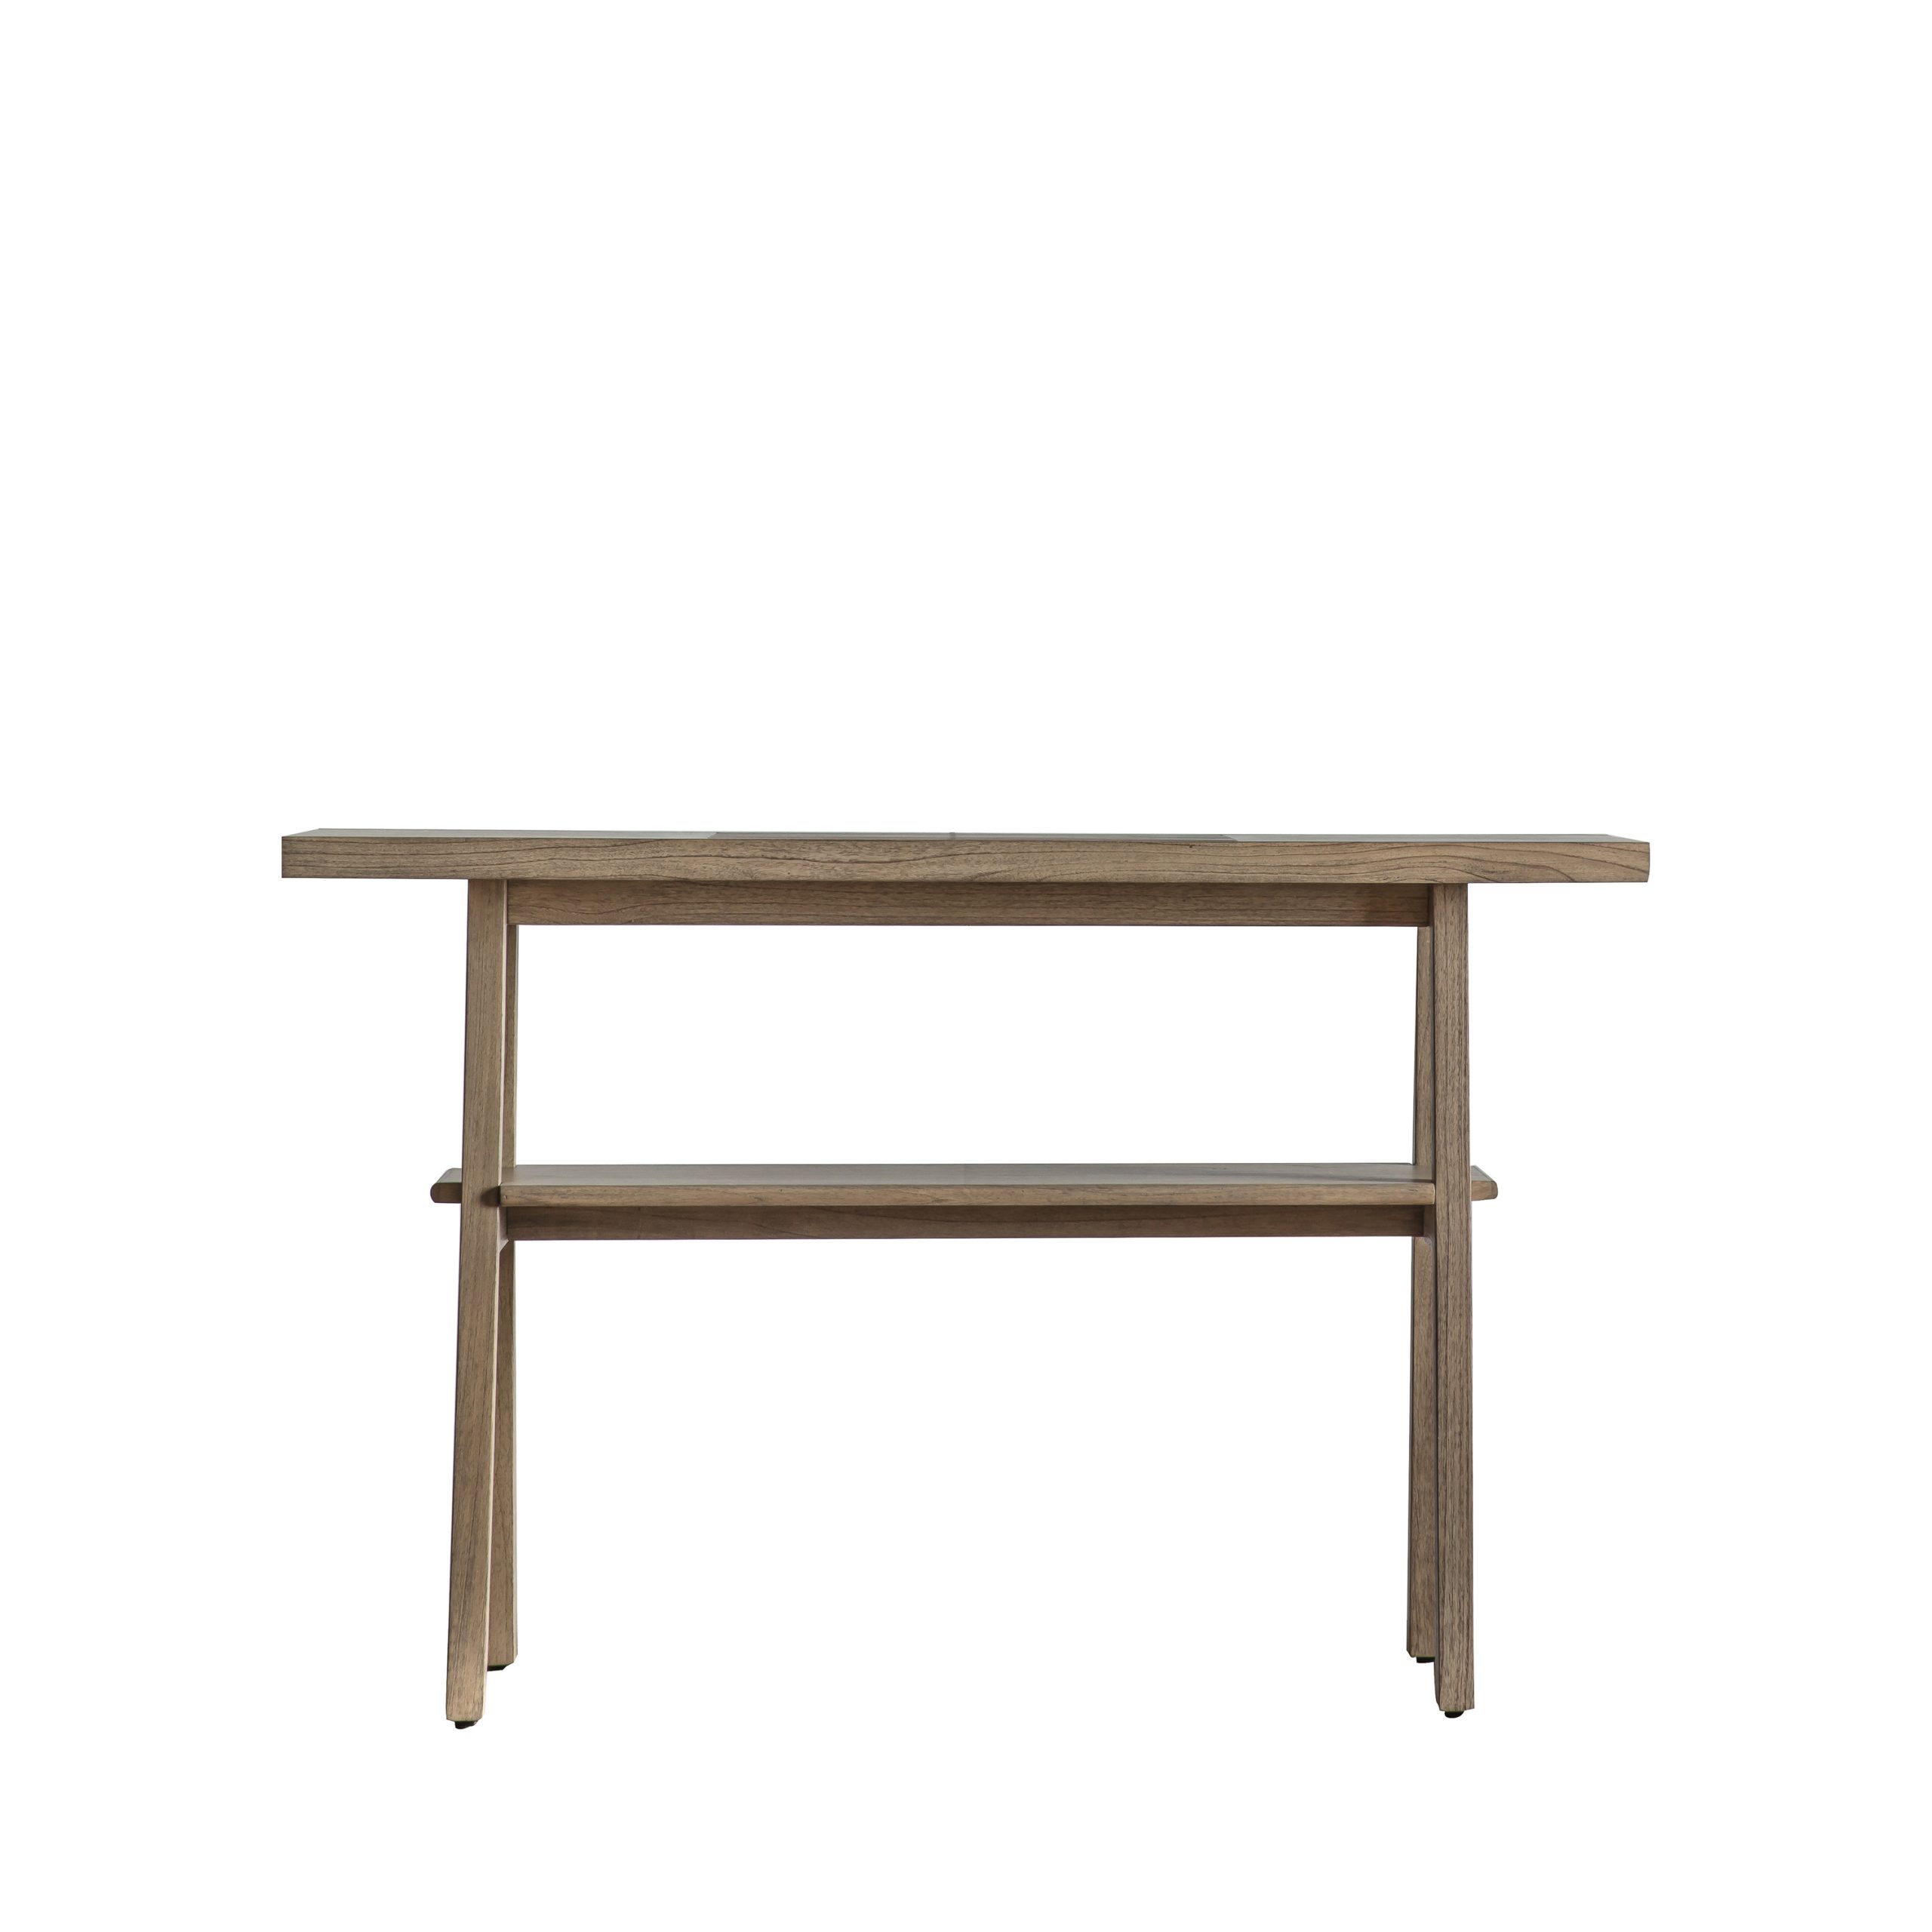 Gallery Direct Kyoto Console Table